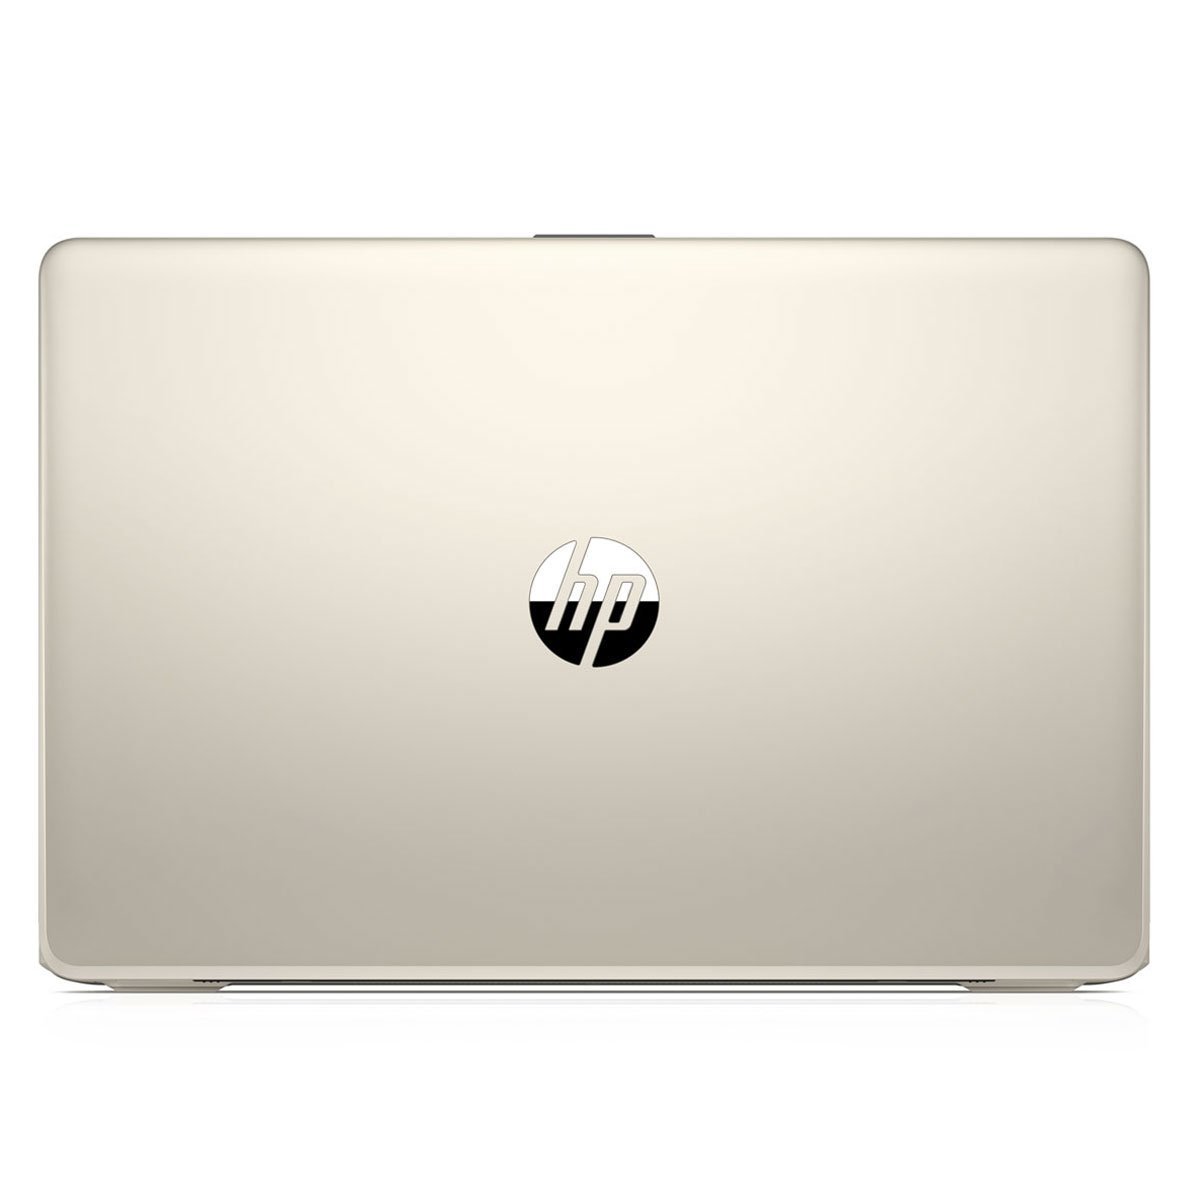 Paquete Laptop Hp 15-Bw005+ Office 365 Personal